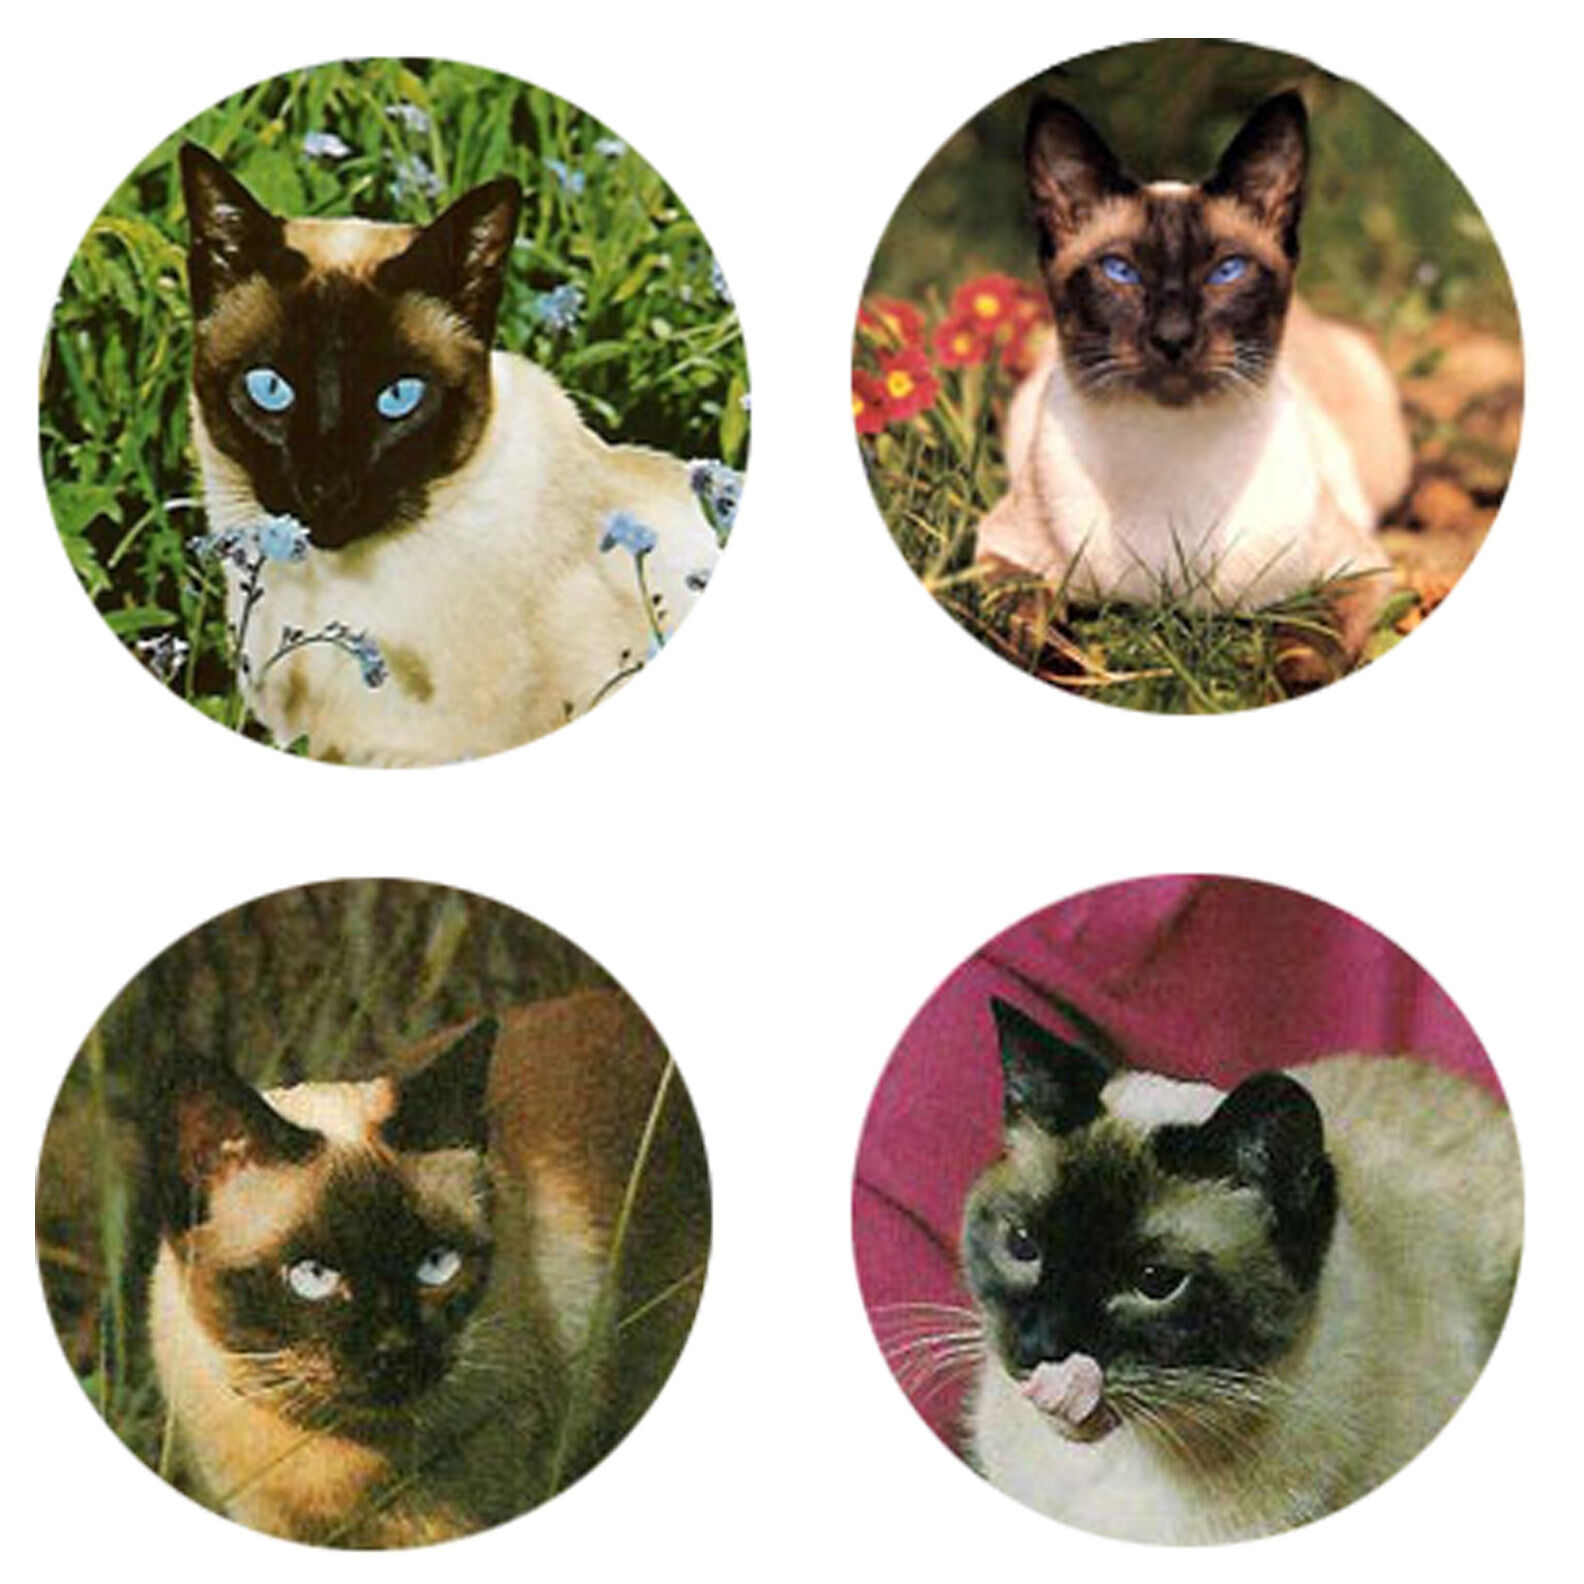 Siamese Cat Magnets: 4 Siamese Cats For Your Fridge Or Collection-a Great Gift